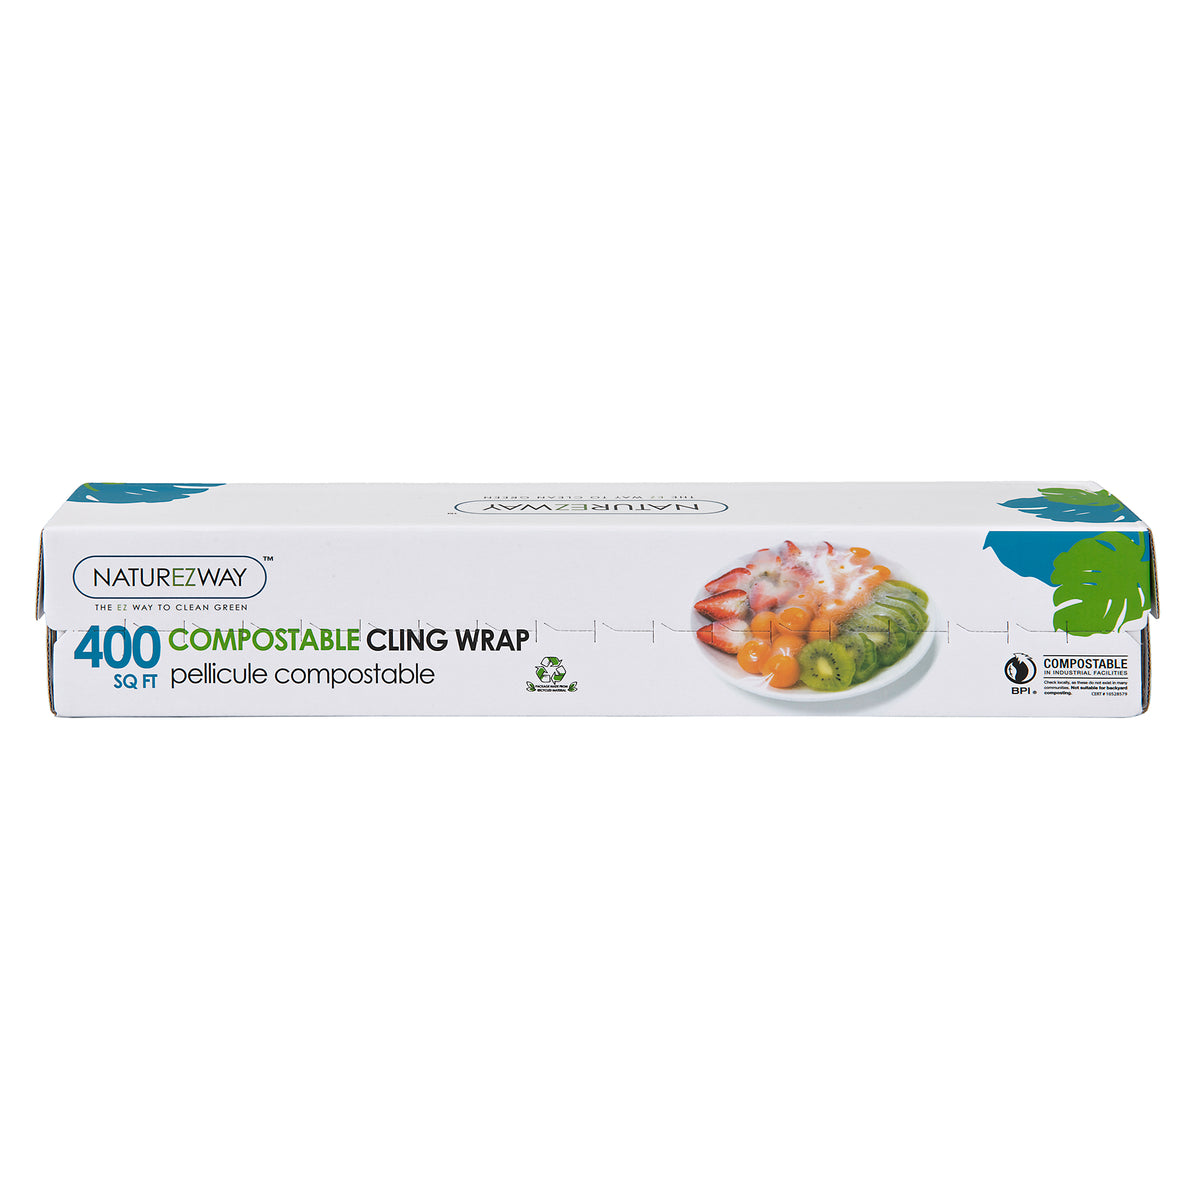 BlknWhite Certified Compostable Cling Wrap with Slide Cutter - 12 Wide by 197 Feet. ASTM 6400 Certified Biodegradable Cling Wrap. Great Alternative